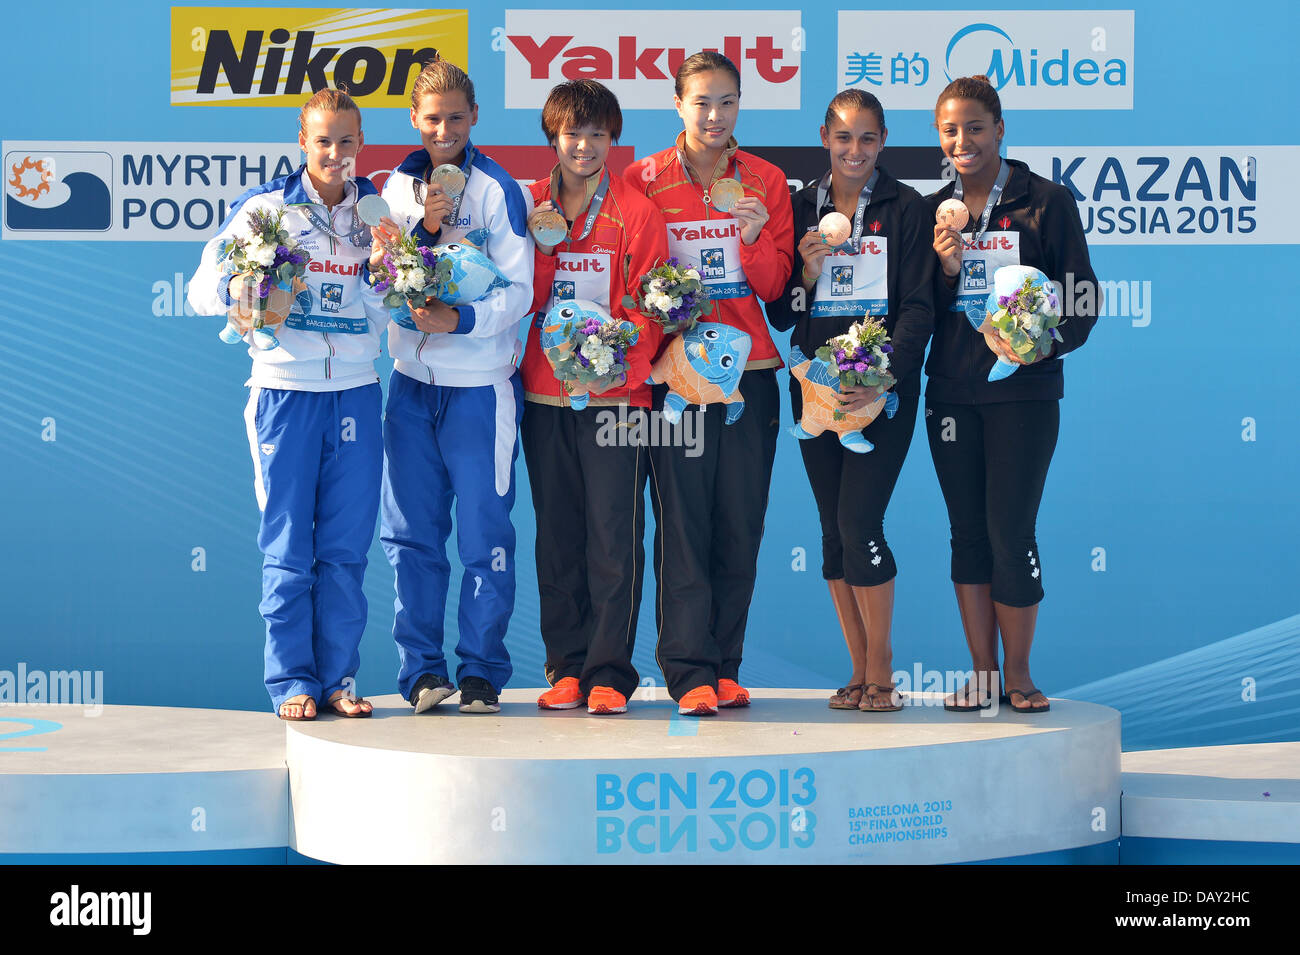 Barcelona, Spain. 20th July, 2013. Gold medalists Minxa Wu and Tingmao Shi of China (C), 2nd Tania Cagnotto and Francesca Dallape of Italy (L) and 3rd Jennifer Abel and Pamela Ware of Canada on the podium after the women's 3m Synchro Springboard diving final of the 15th FINA Swimming World Championships at Montjuic Municipal Pool in Barcelona, Spain, 20 July 2013. Foto: David Ebener/dpa /dpa/Alamy Live News Stock Photo